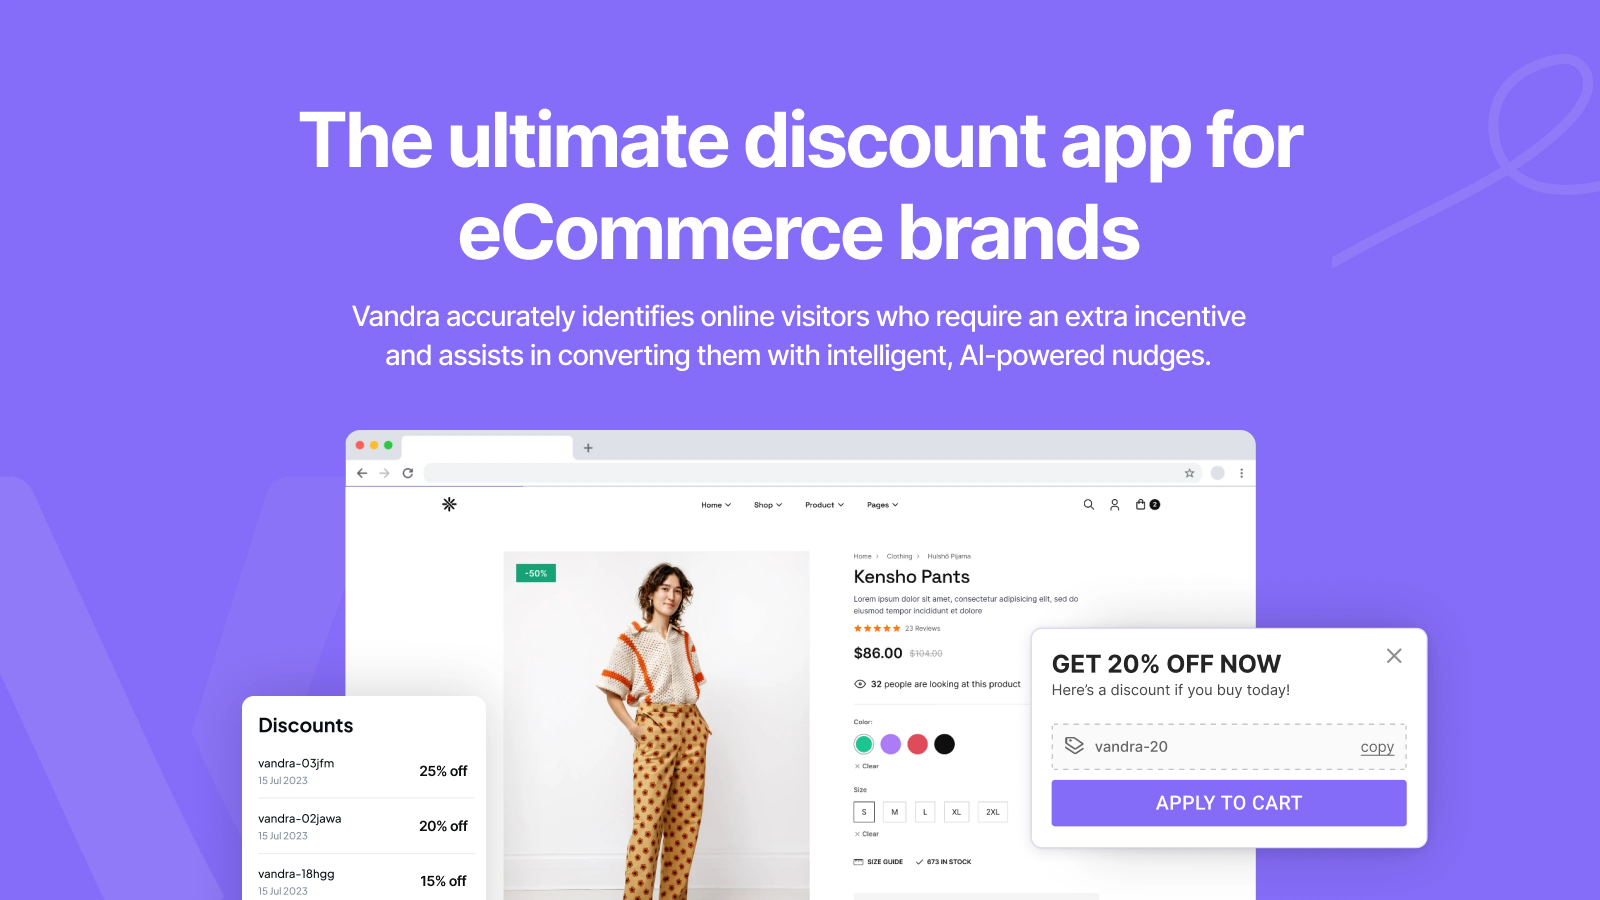 The ultimate discount app for eCommerce brands